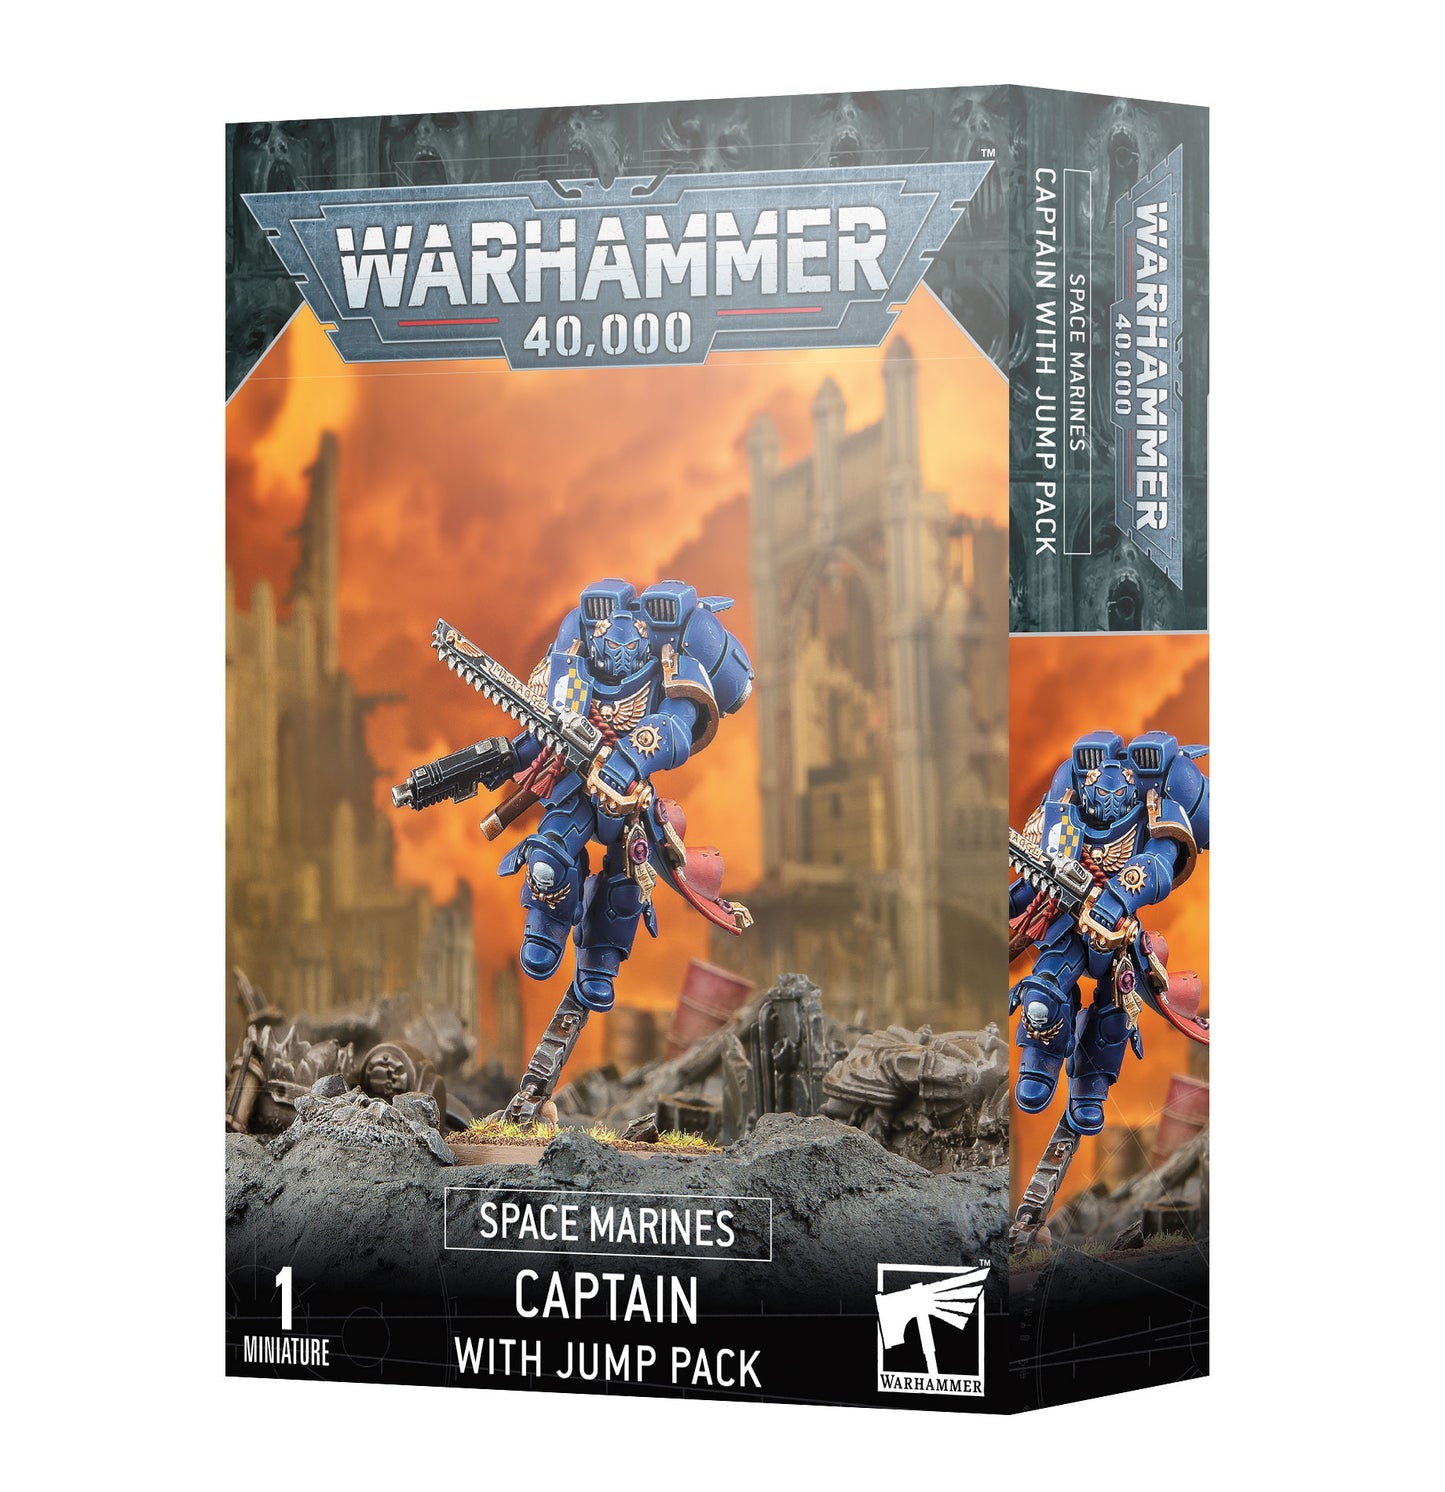 Warhammer 40,000 - Space Marines Captain With Jump Pack